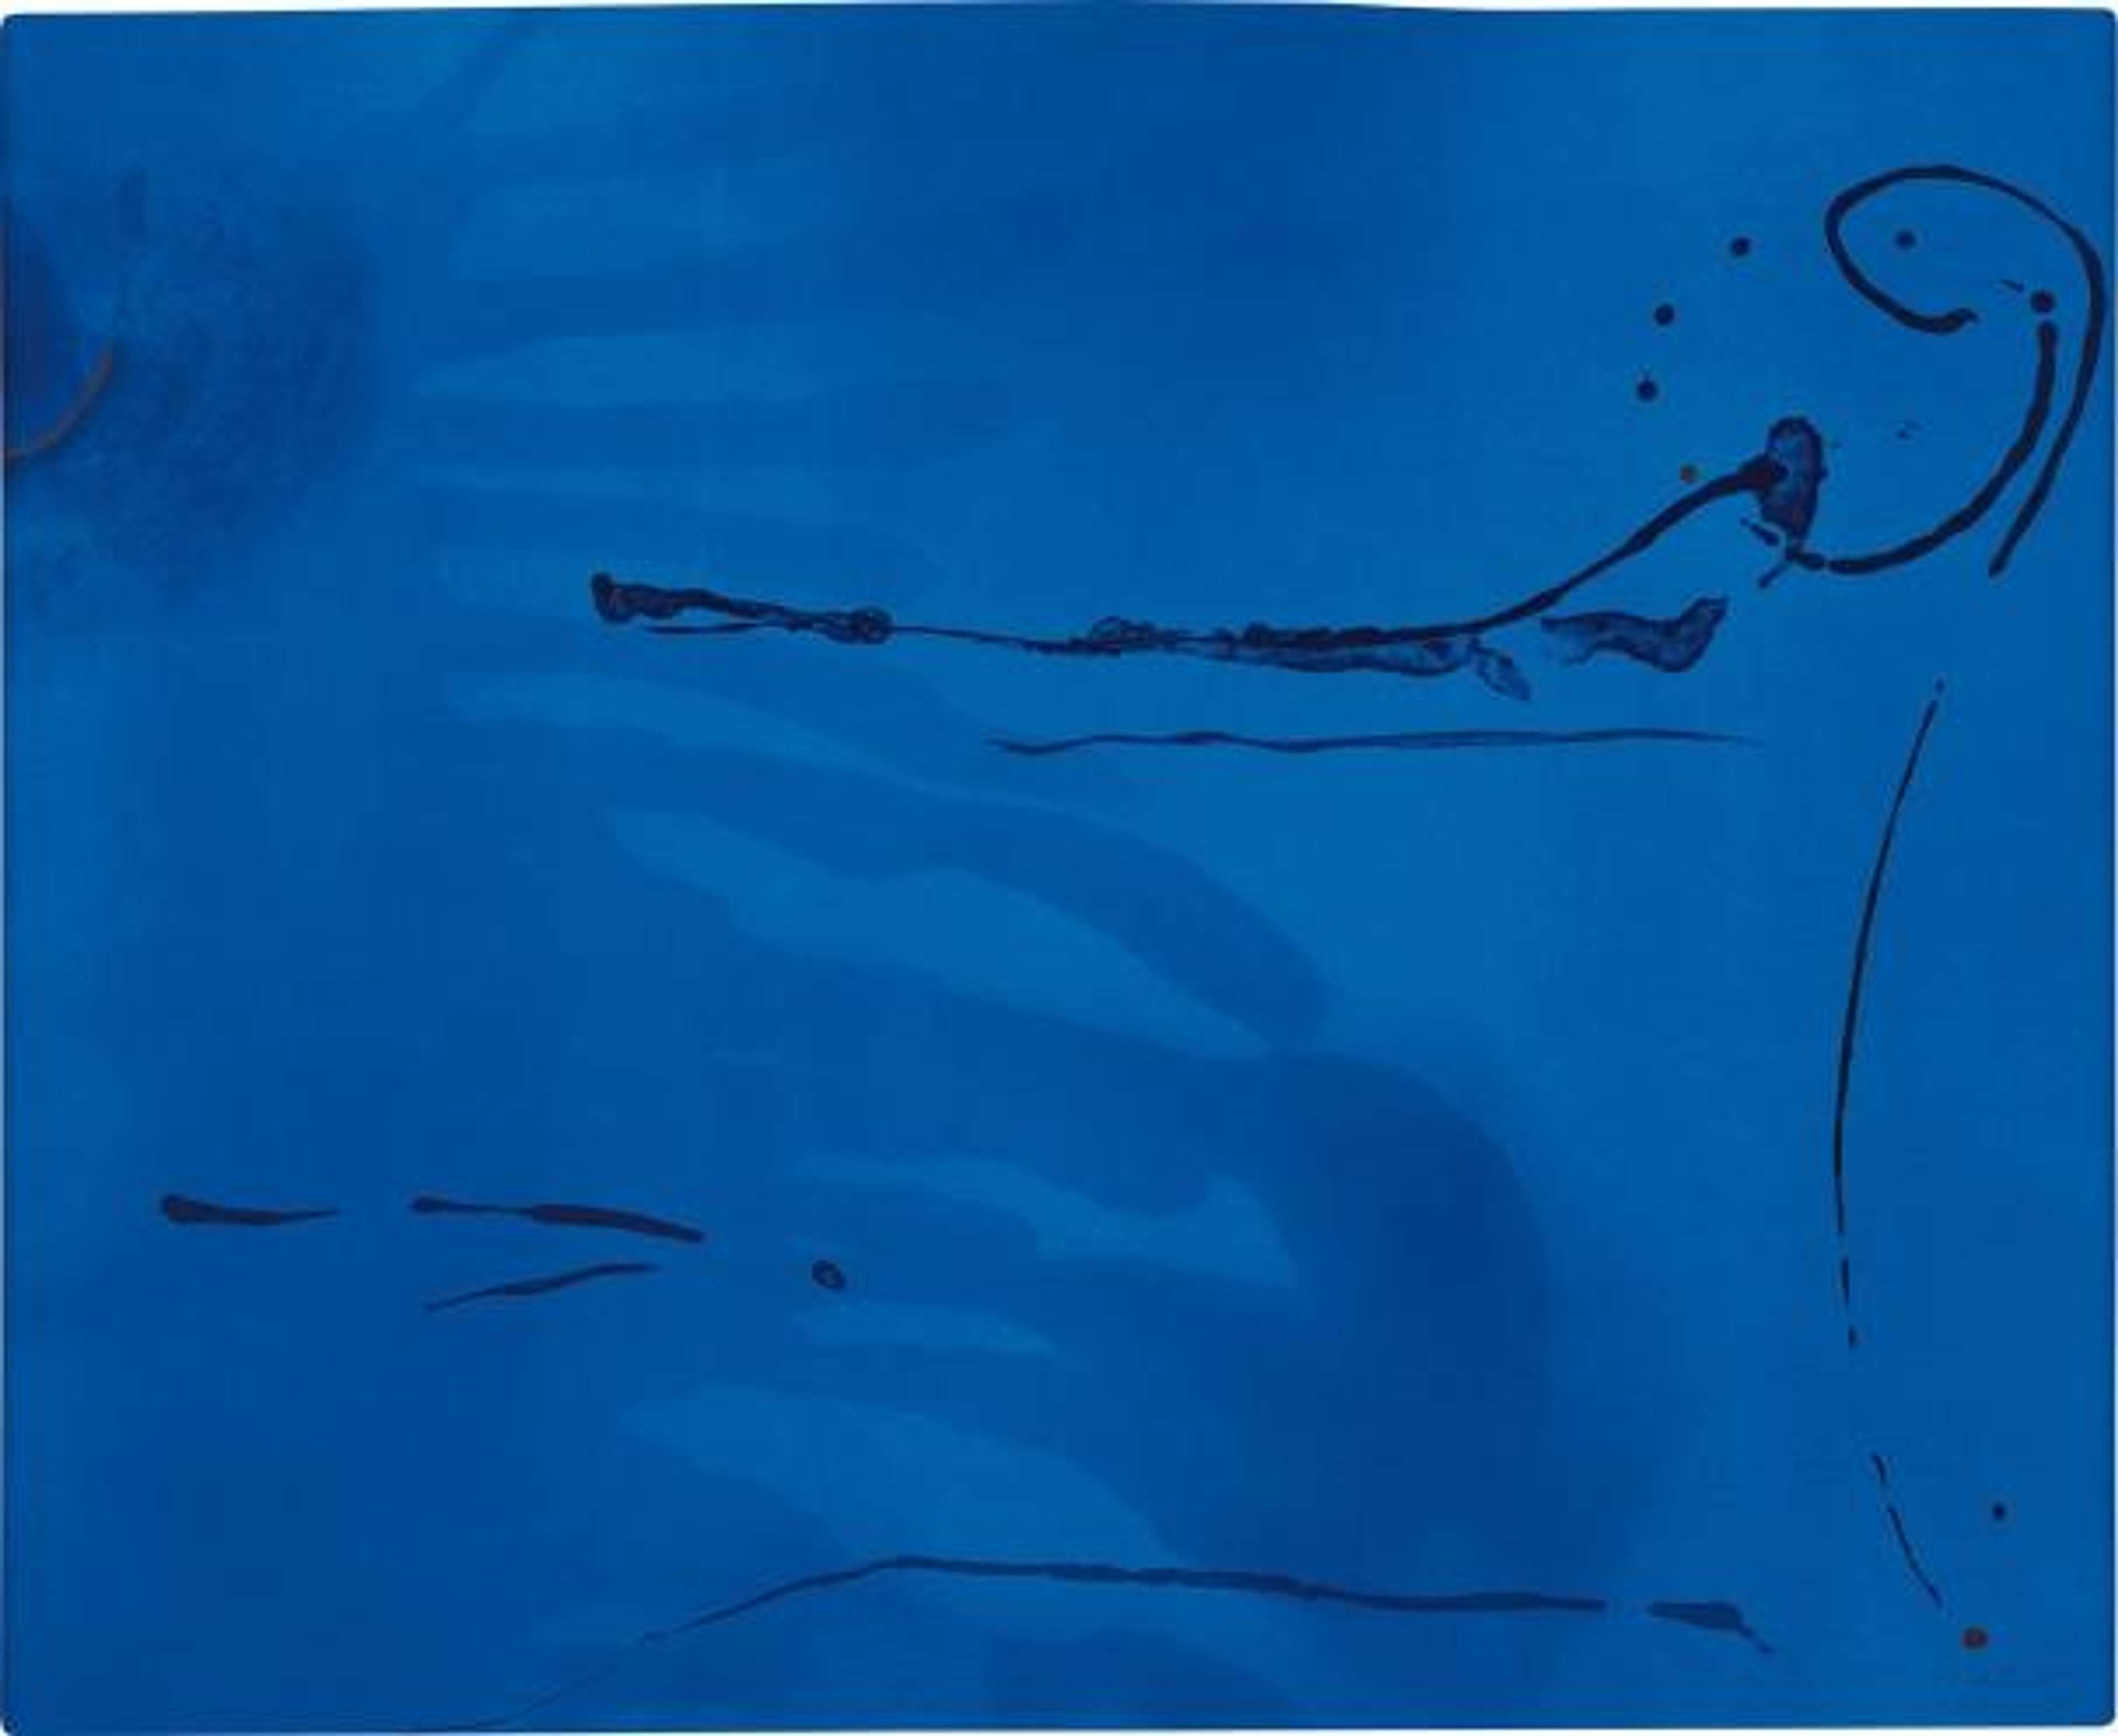 Helen Frankenthaler’s Blue Current. An abstract expressionist intaglio of deep blue water currents.